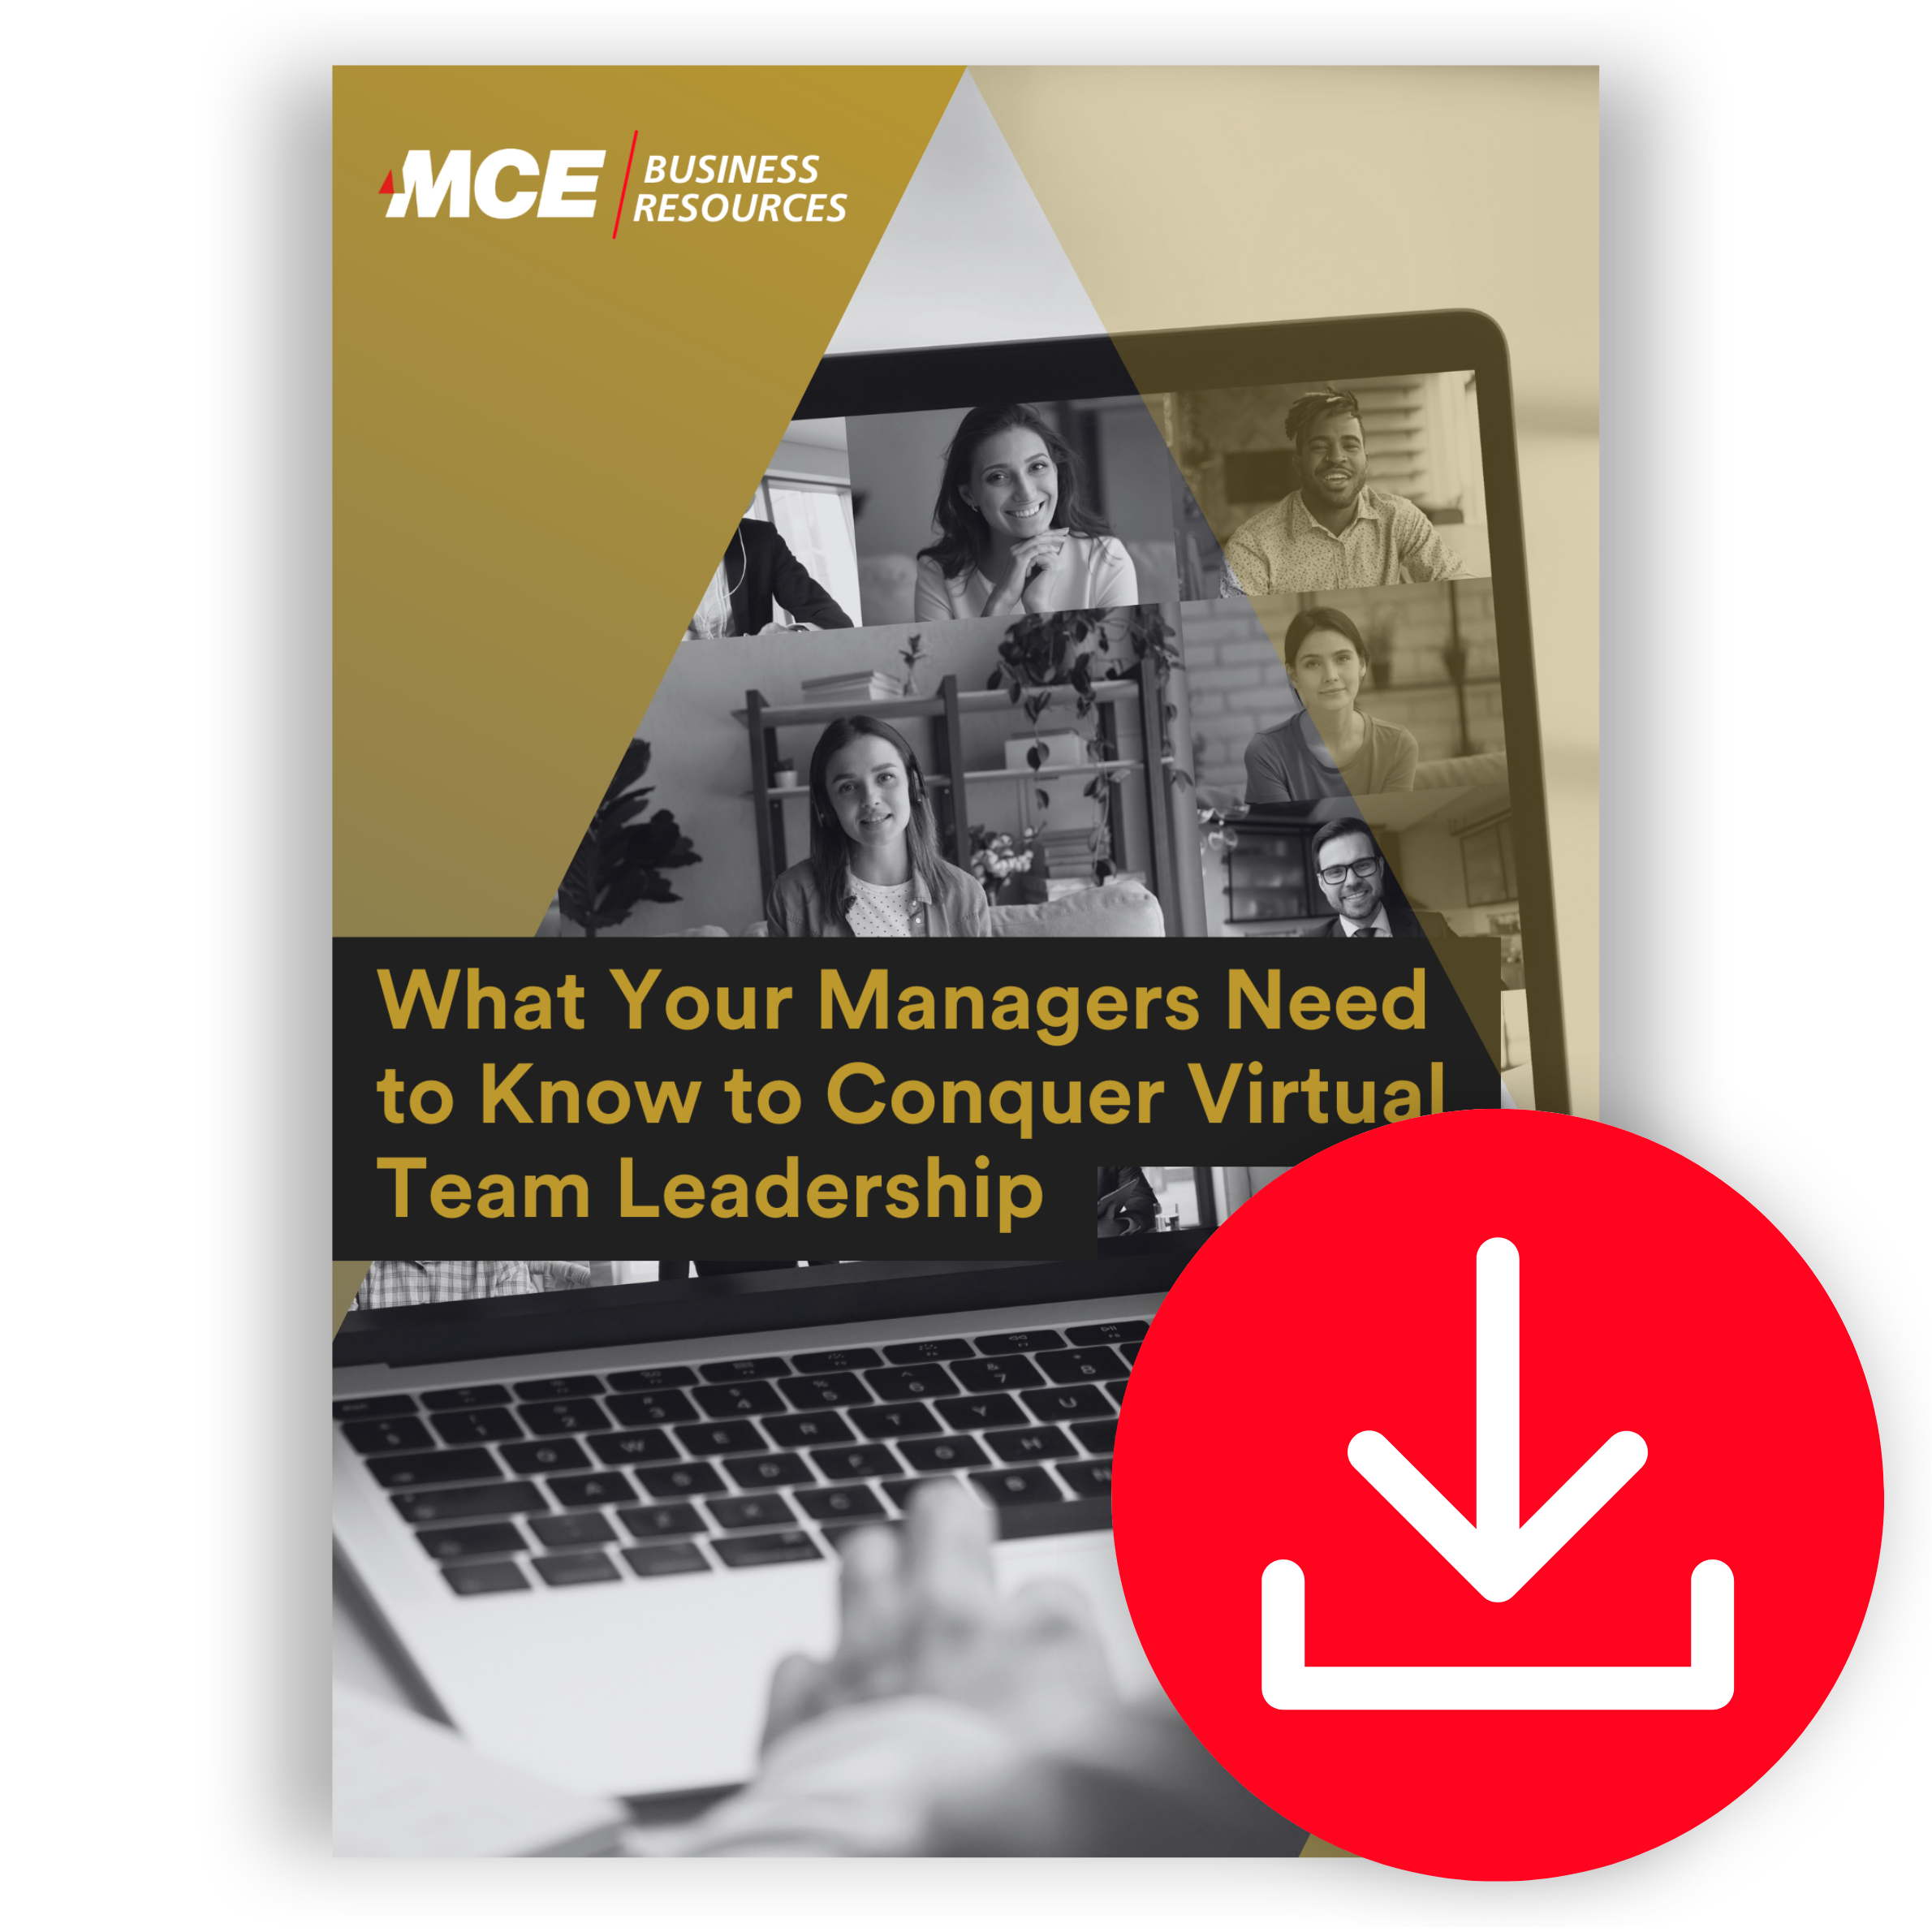 What Your Managers Need to Know to Conquer Virtual Team Leadership